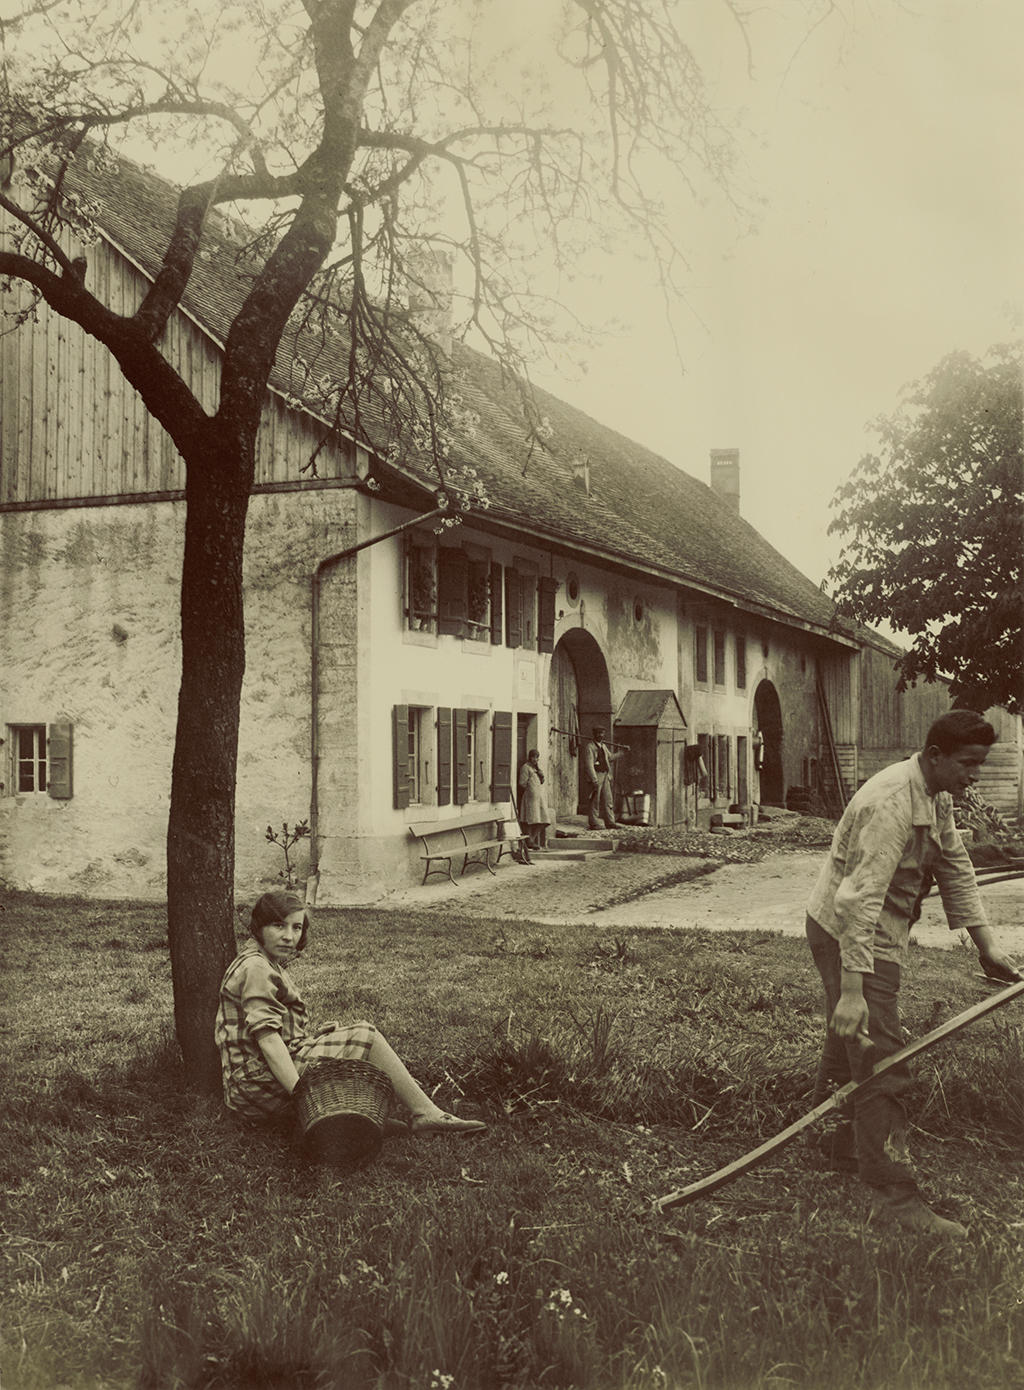 Farmhouse with people in the foreground, woman looking at the camera